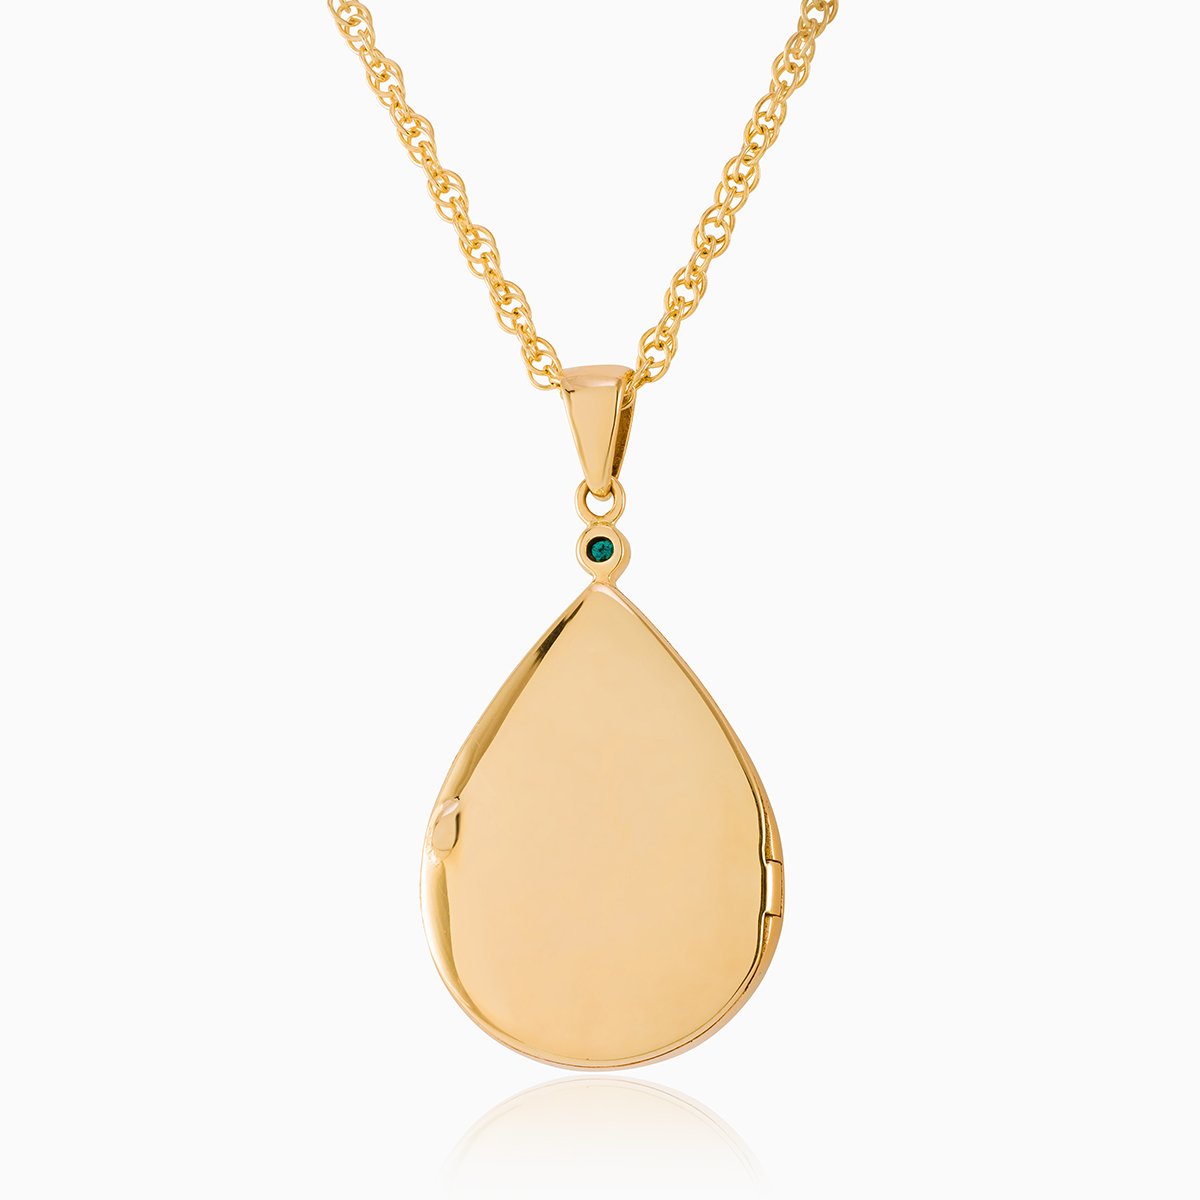 Back view of a 9ct gold teardrop shaped locket, on a 9 ct gold rope chain